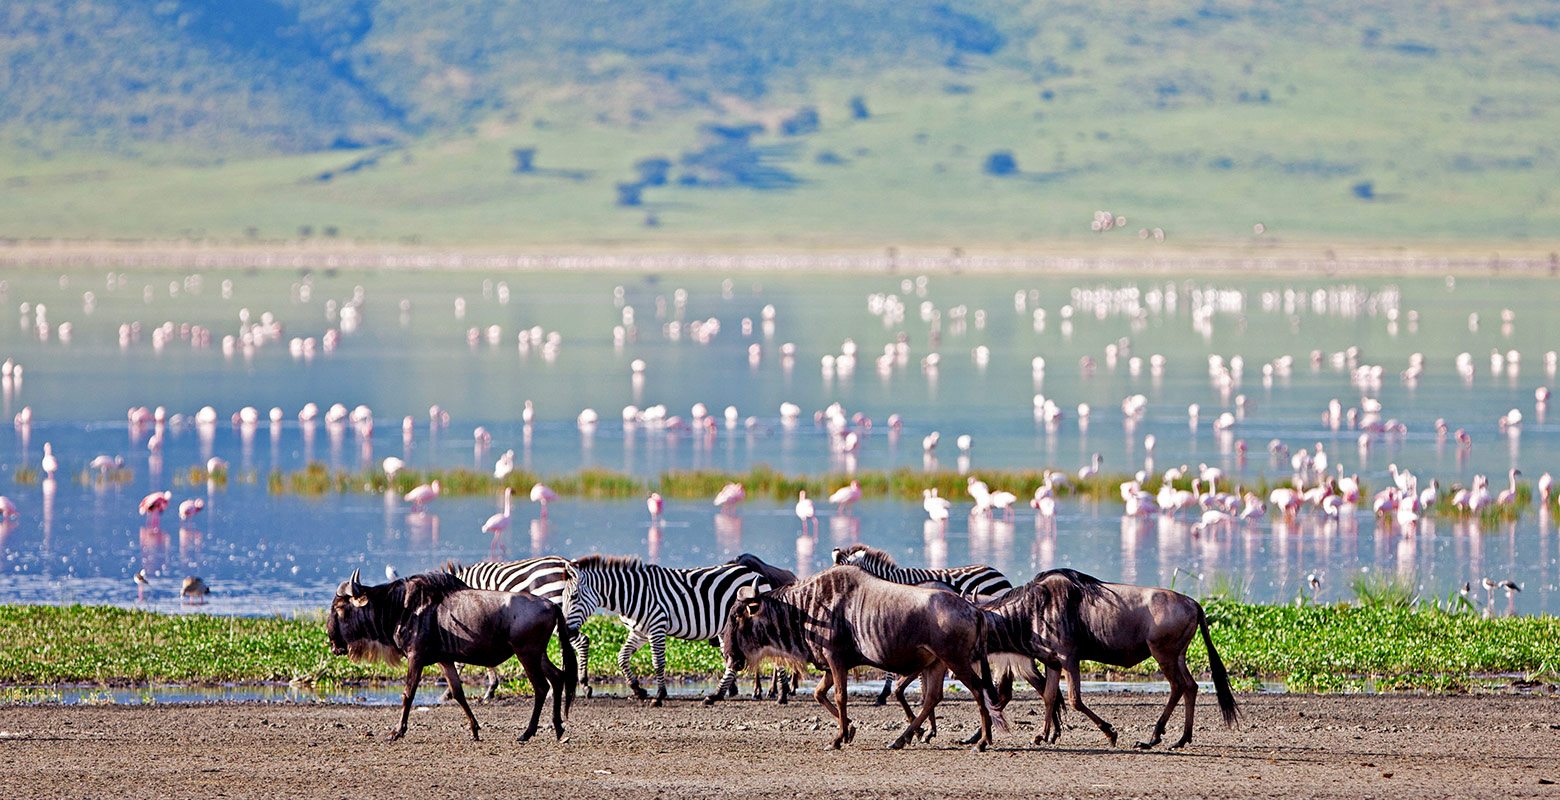 Tourist Attractions at Ngorongoro Conservation Area